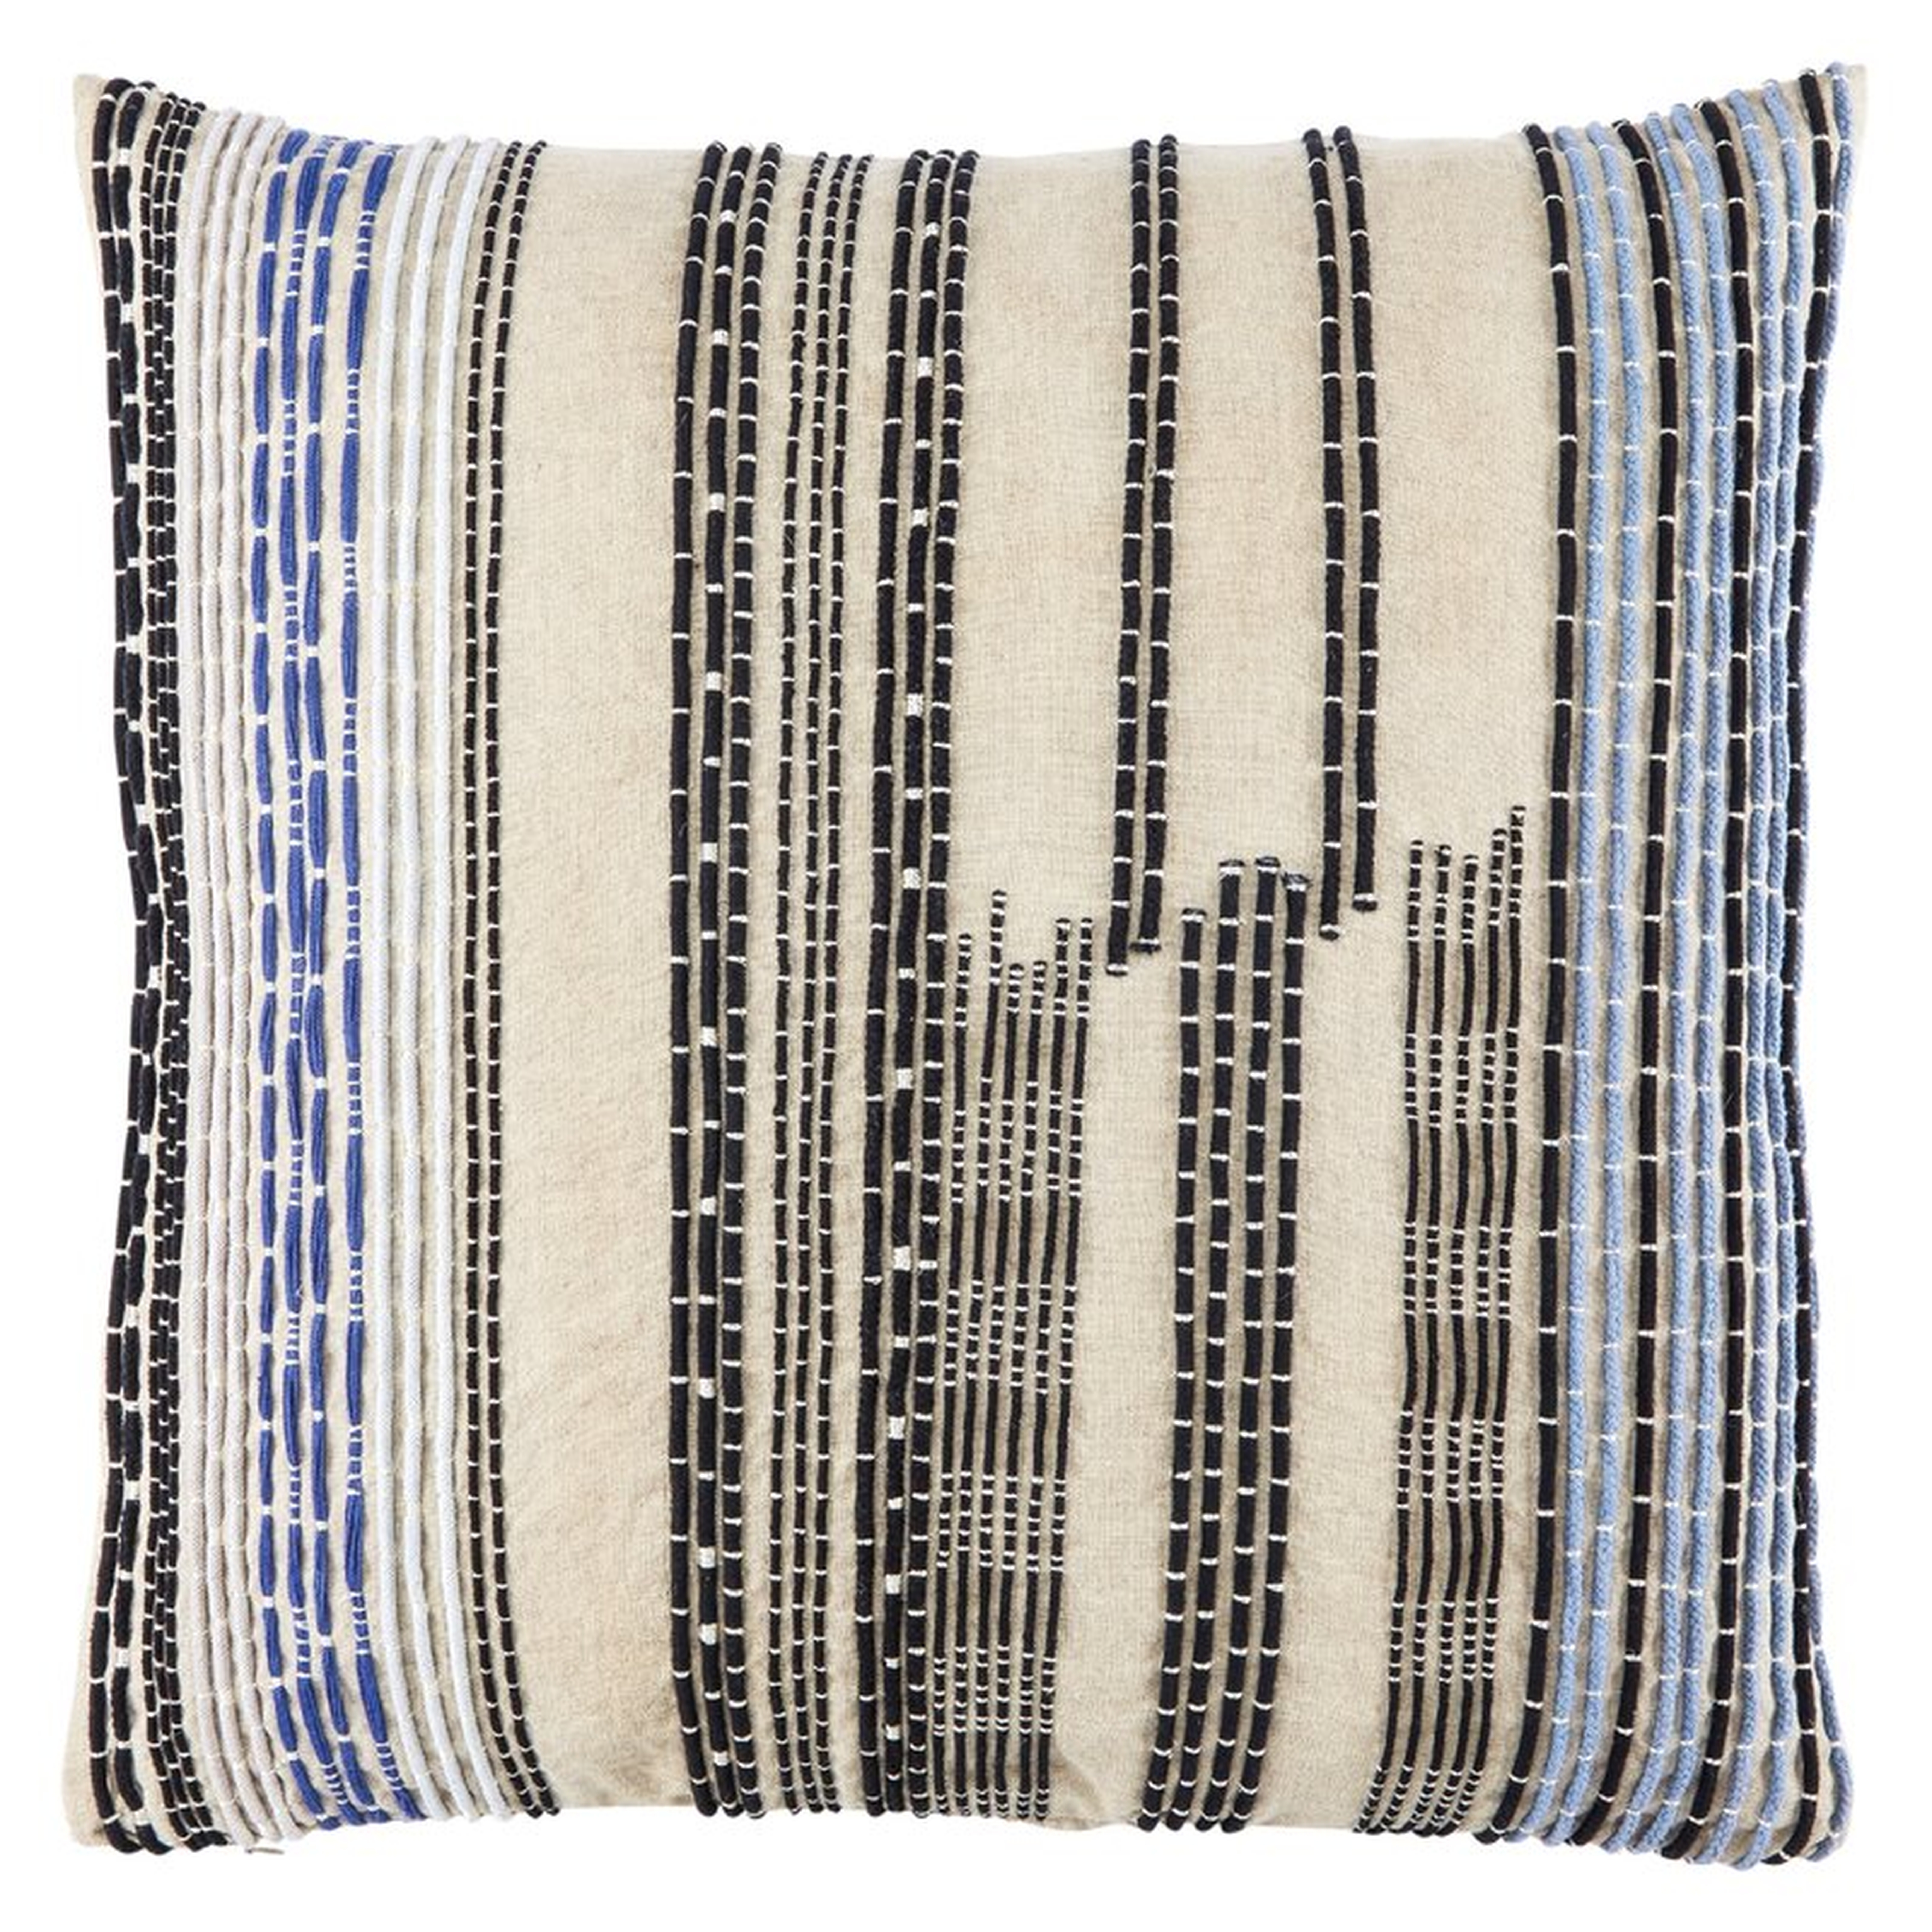 Jaipur Living Daintree Striped Throw Pillow Color: Blue/Black, Fill Material: Down/Feather - Perigold